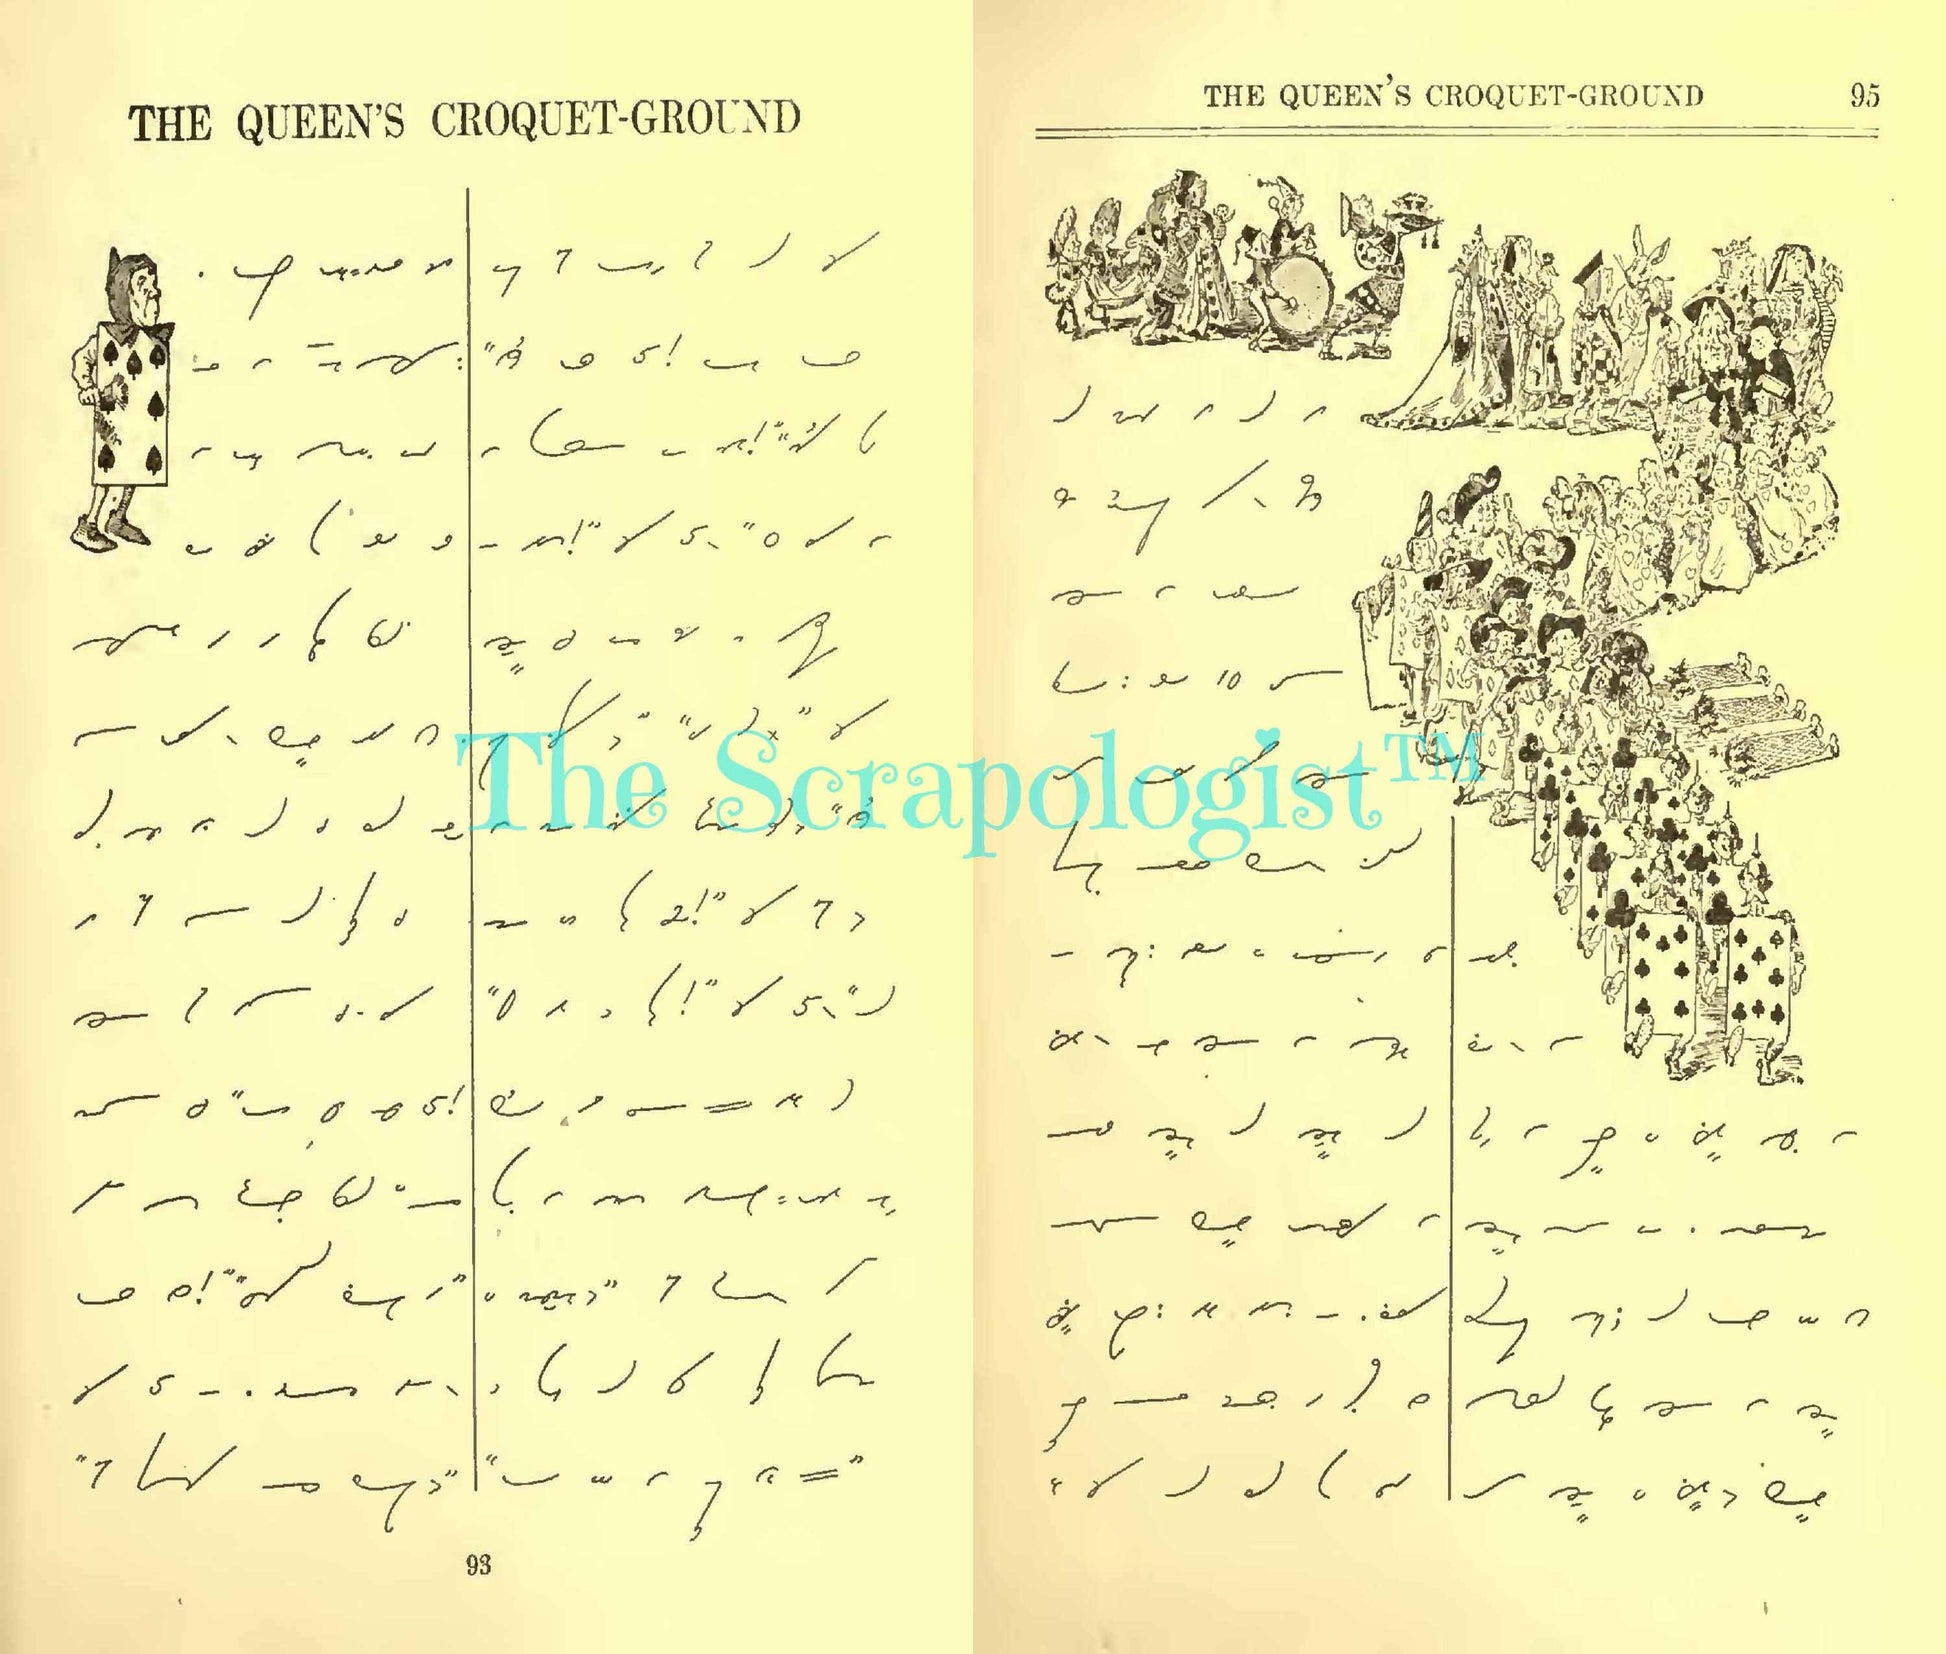 Alice’s Adventures in Shorthand, Alice in Wonderland, Printable Junk Journal Kit, Page Inserts  | Digital Download